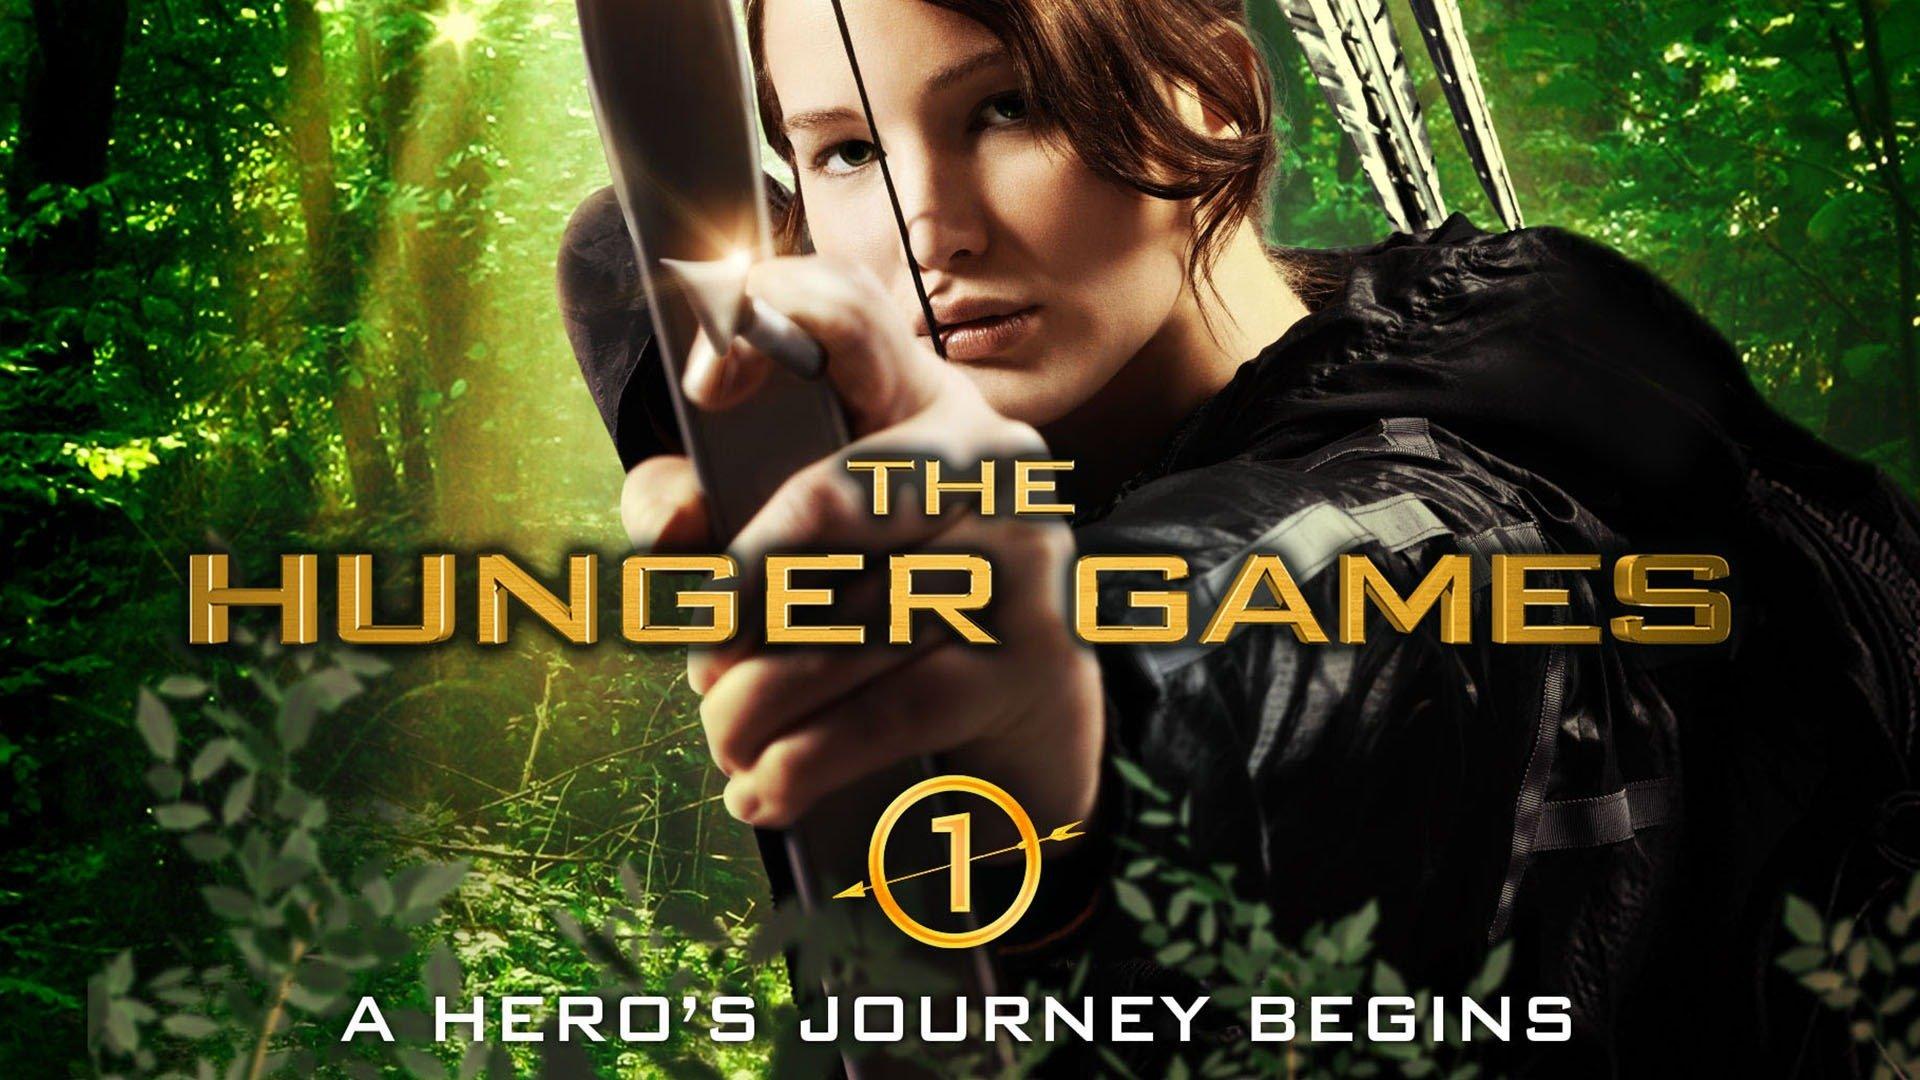 Watch The Hunger Games Streaming Online on Philo (Free Trial)